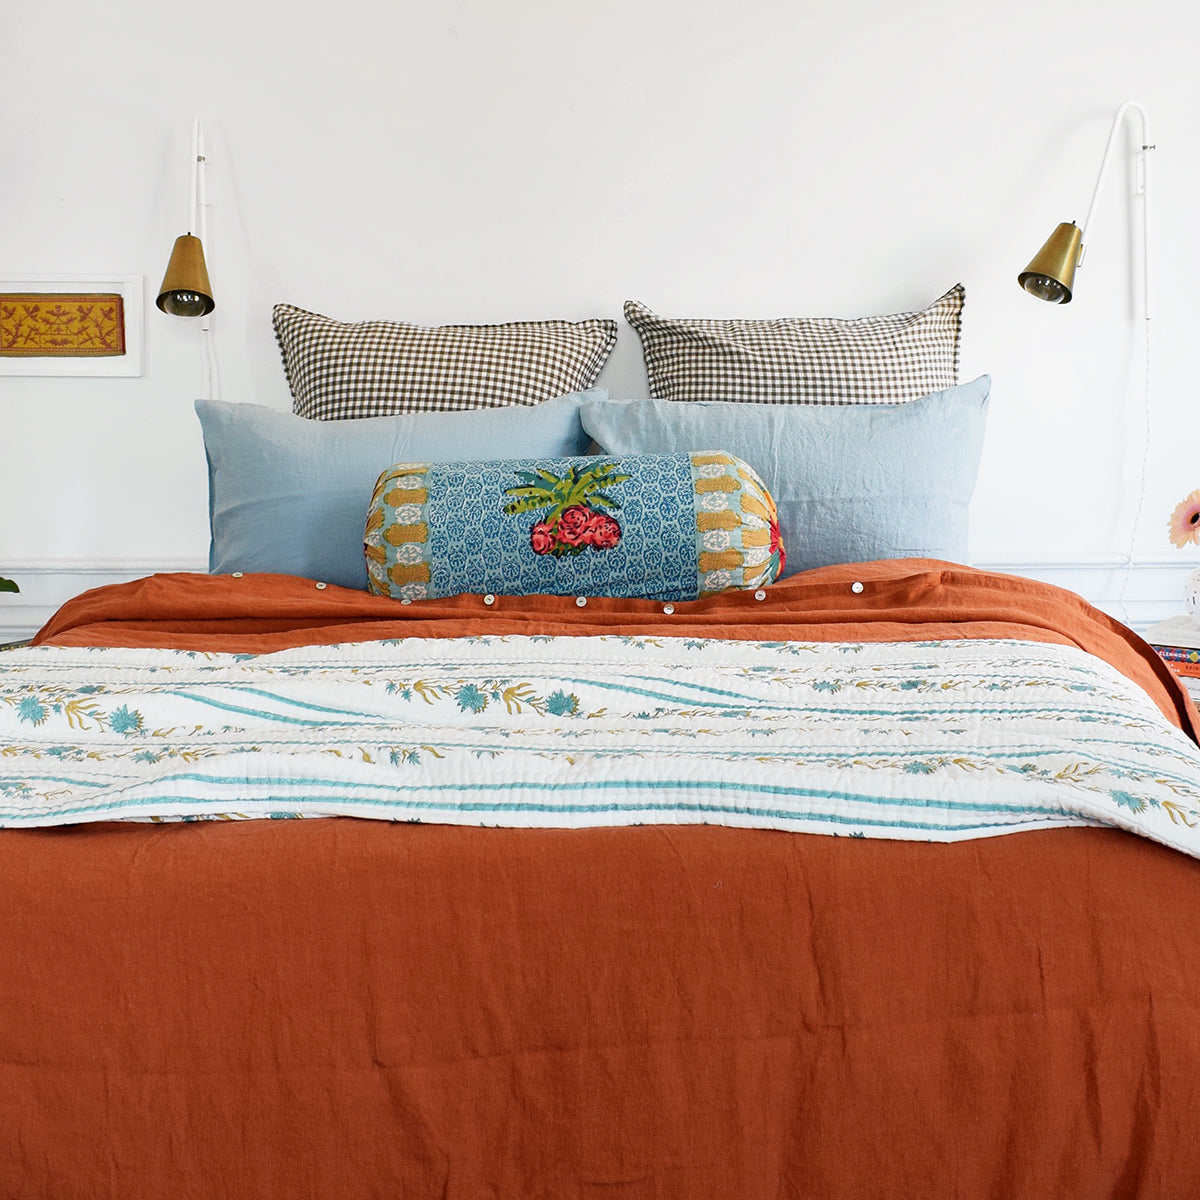 A Linge Particulier Linen Duvet in Sienna gives a orange and rust color to this duvet for a colorful linen bedding look from Collyer's Mansion